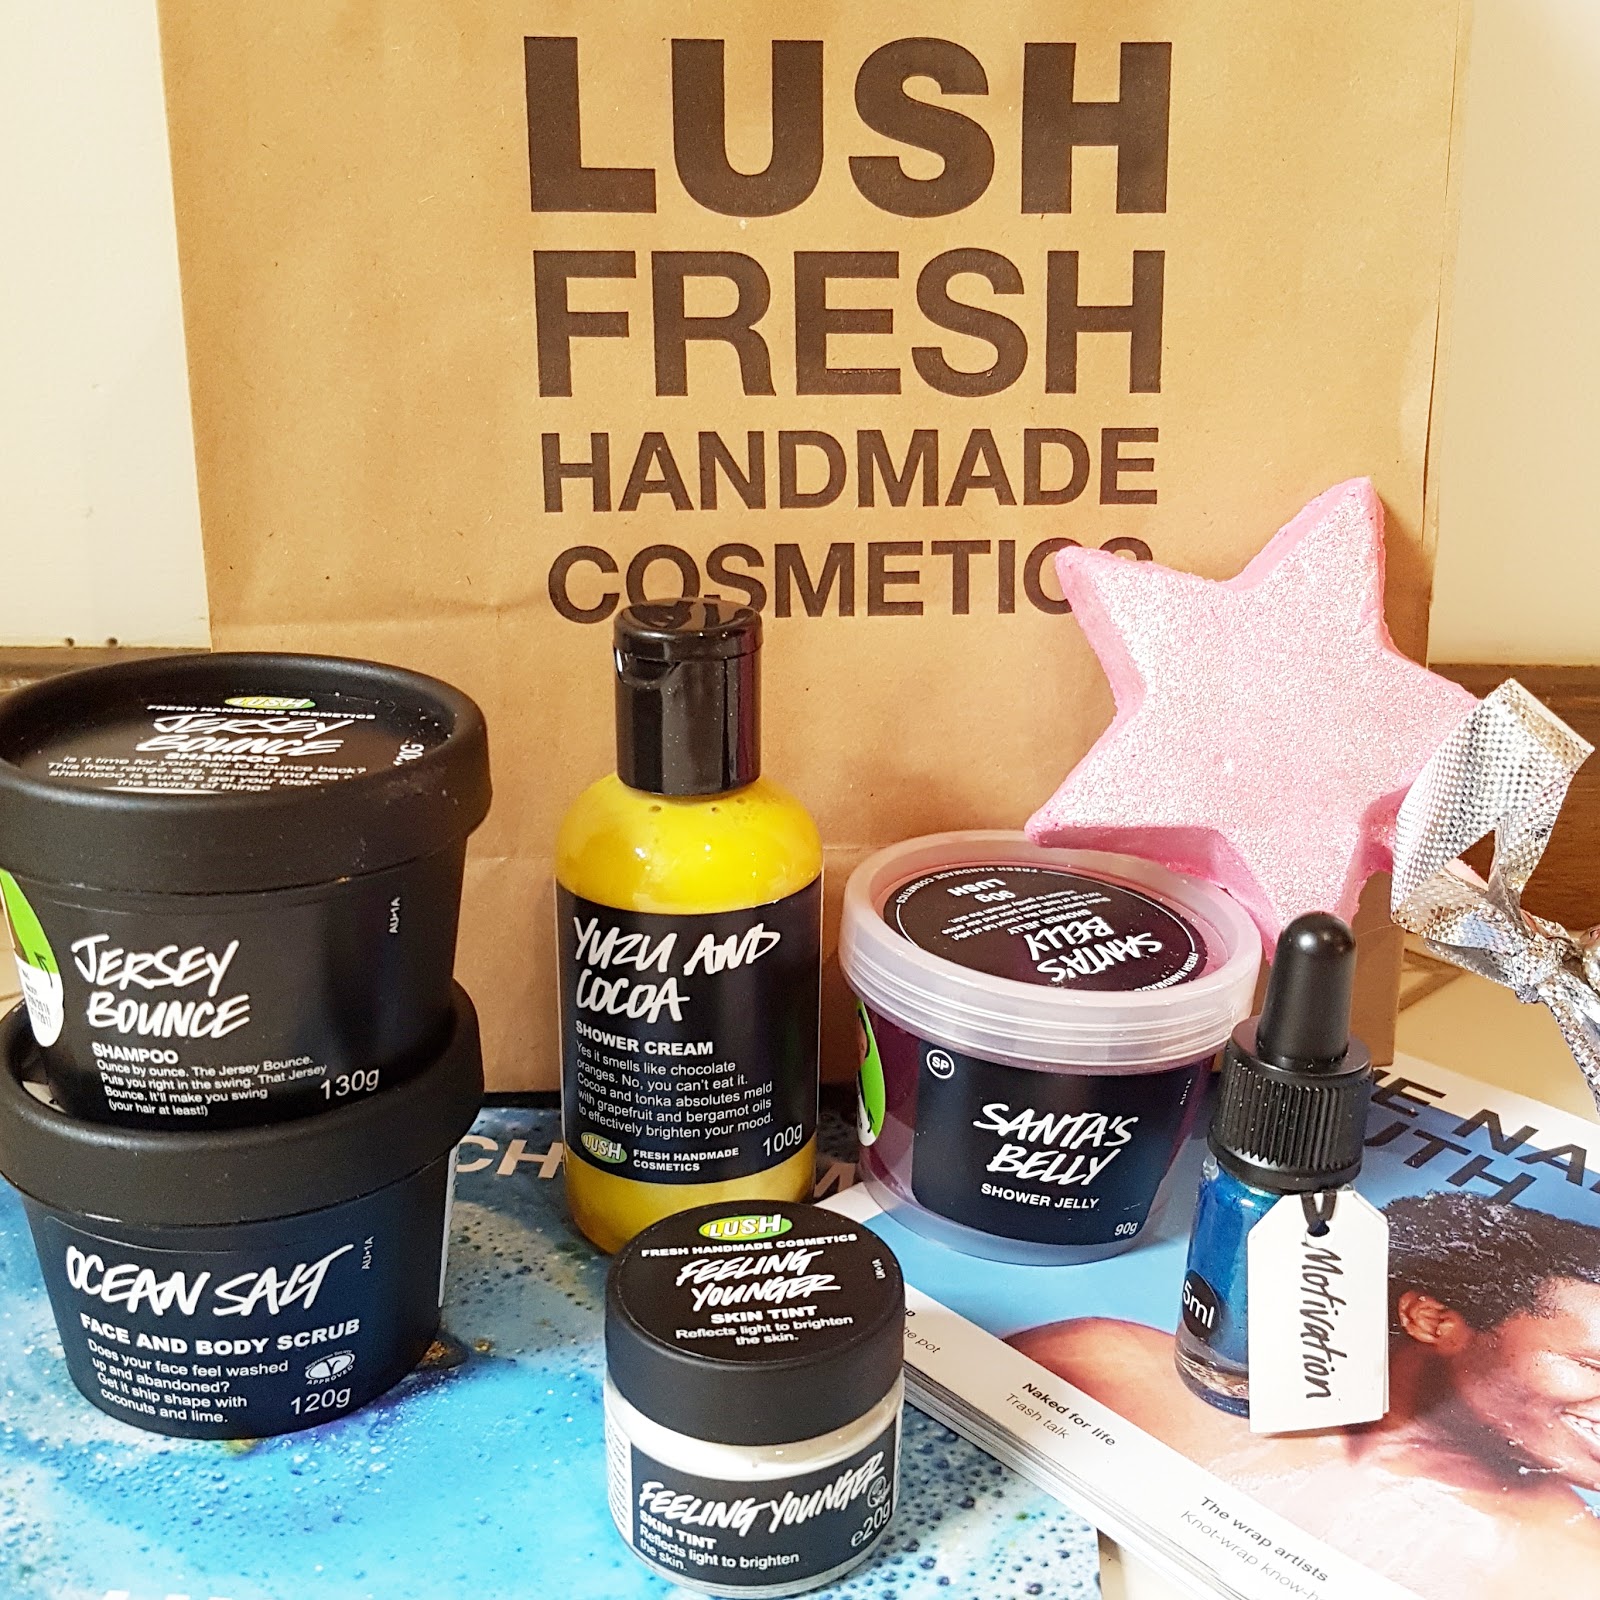 nek Poging impuls LUSH Product Review Round-Up - Almost Posh